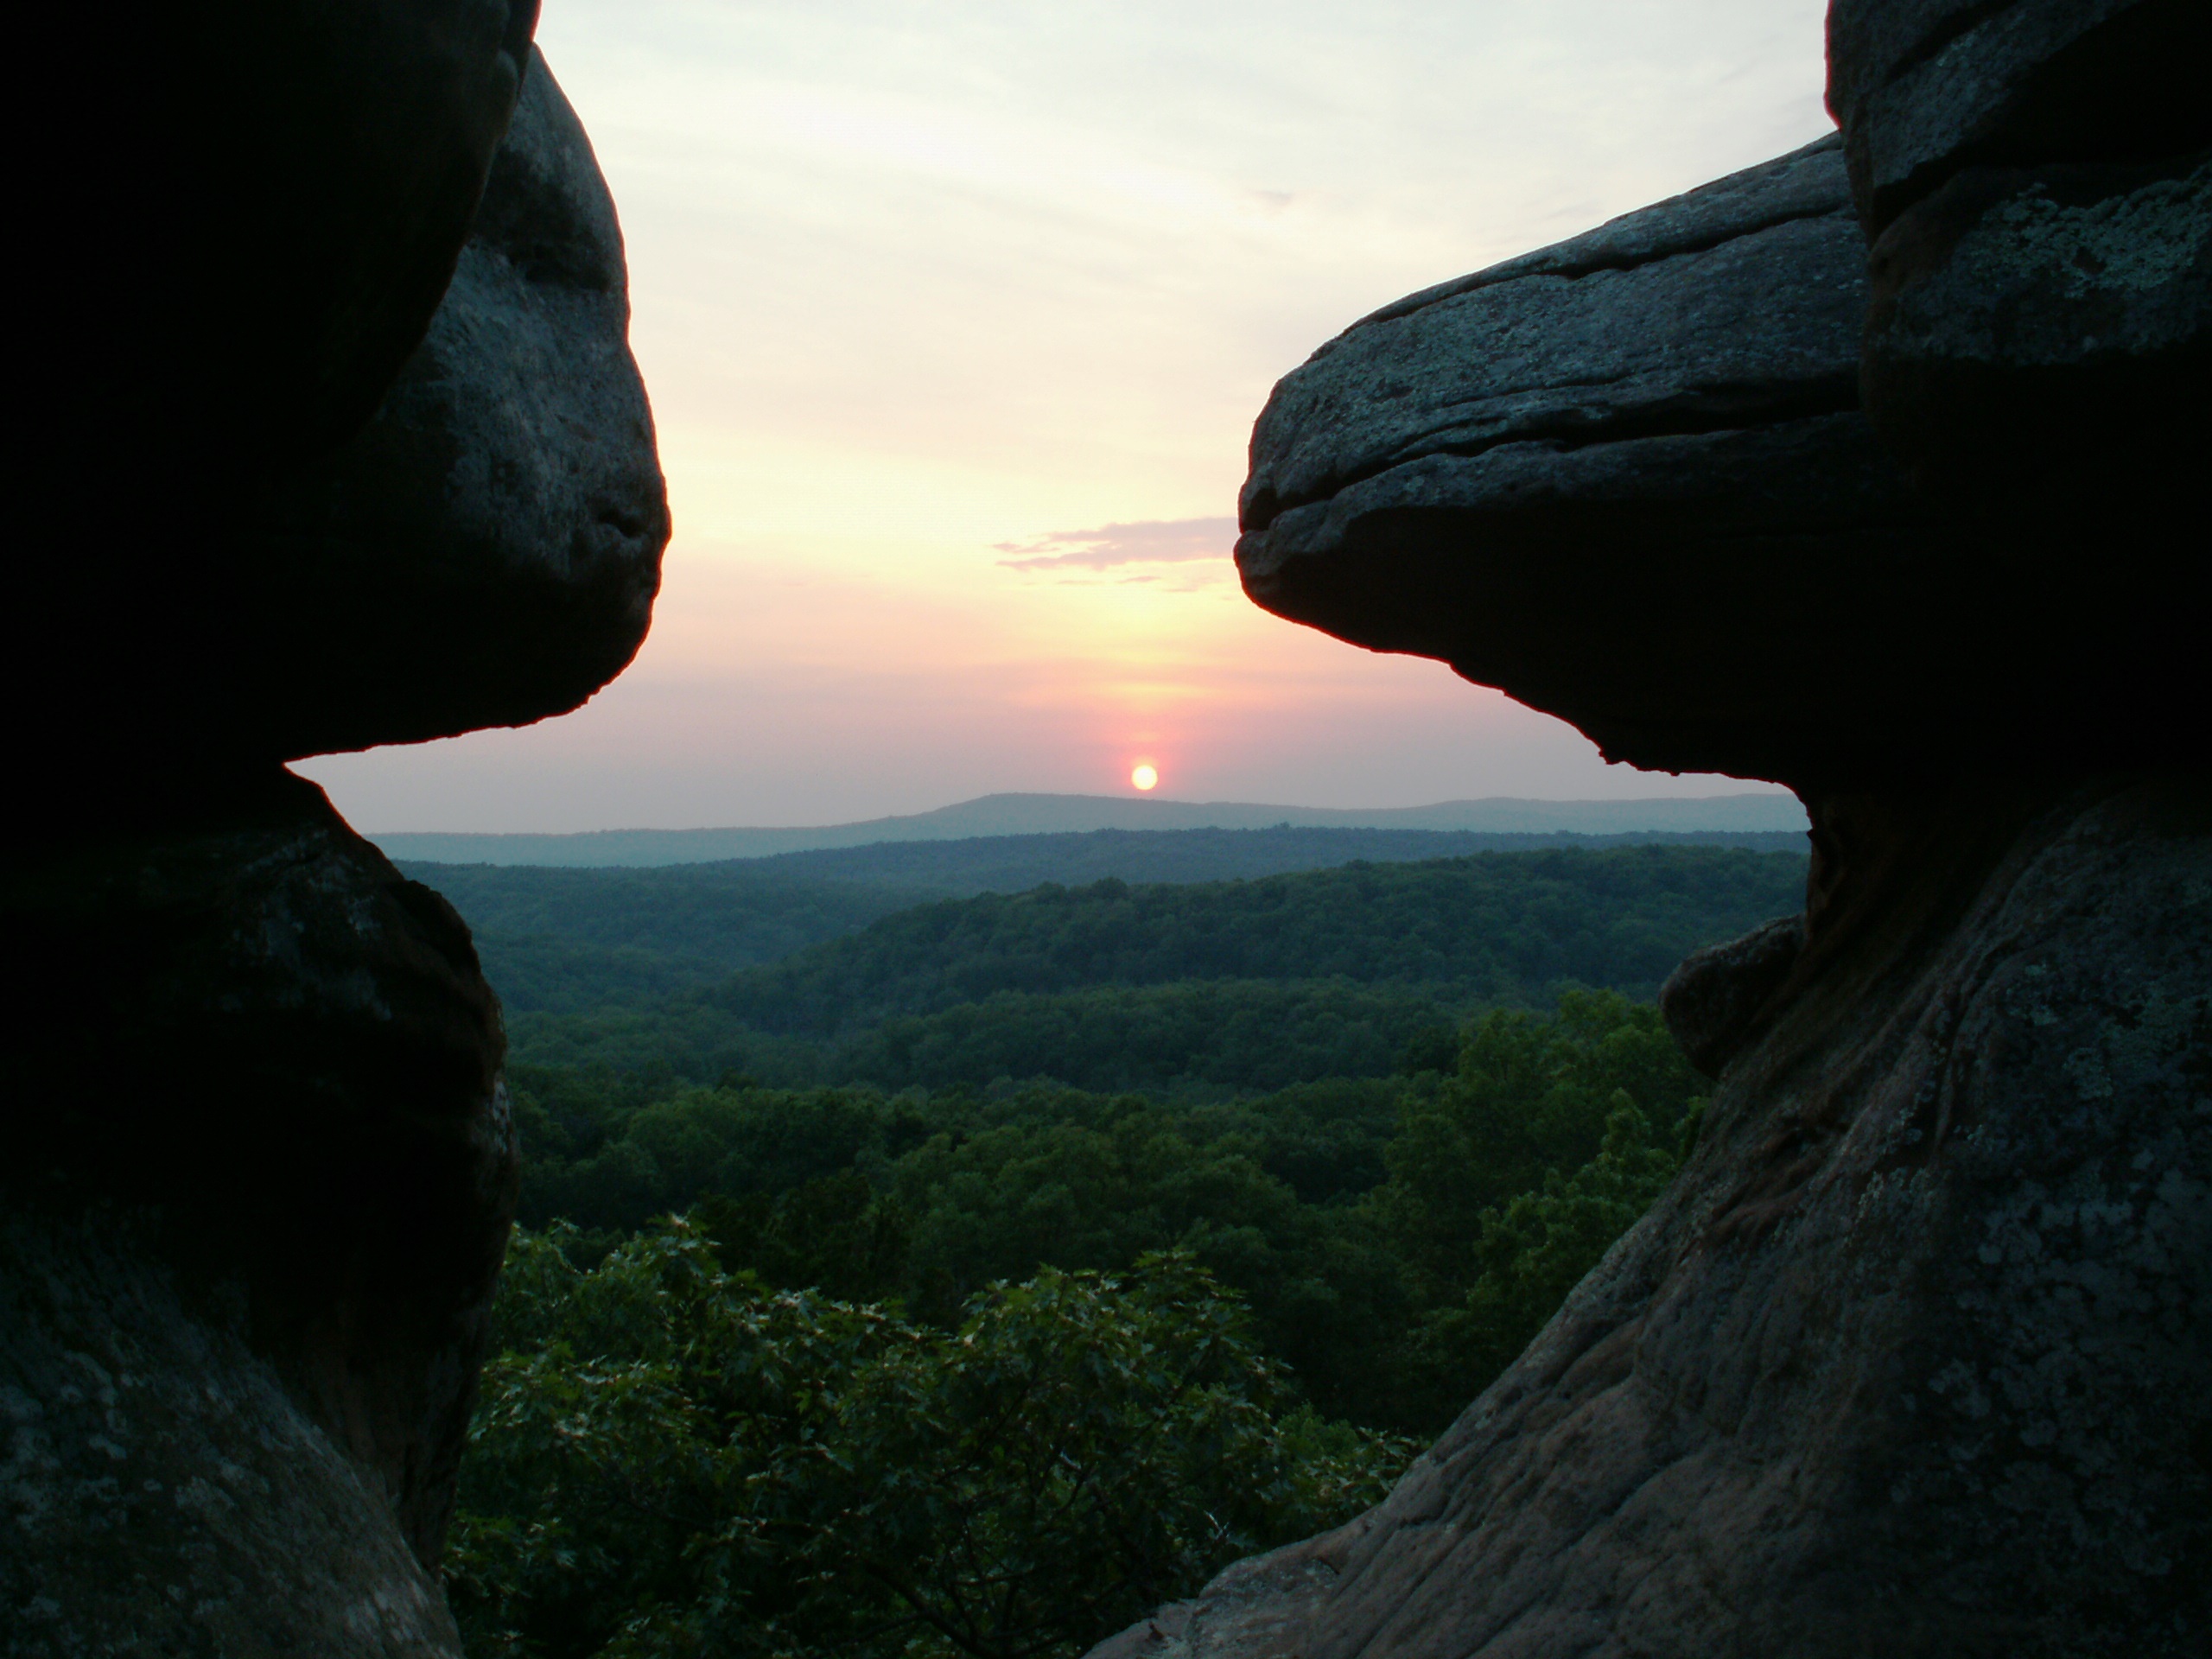 Shawnee National Forest and Cave-in-Rock State Park: Southern Illinois Natural Beauty